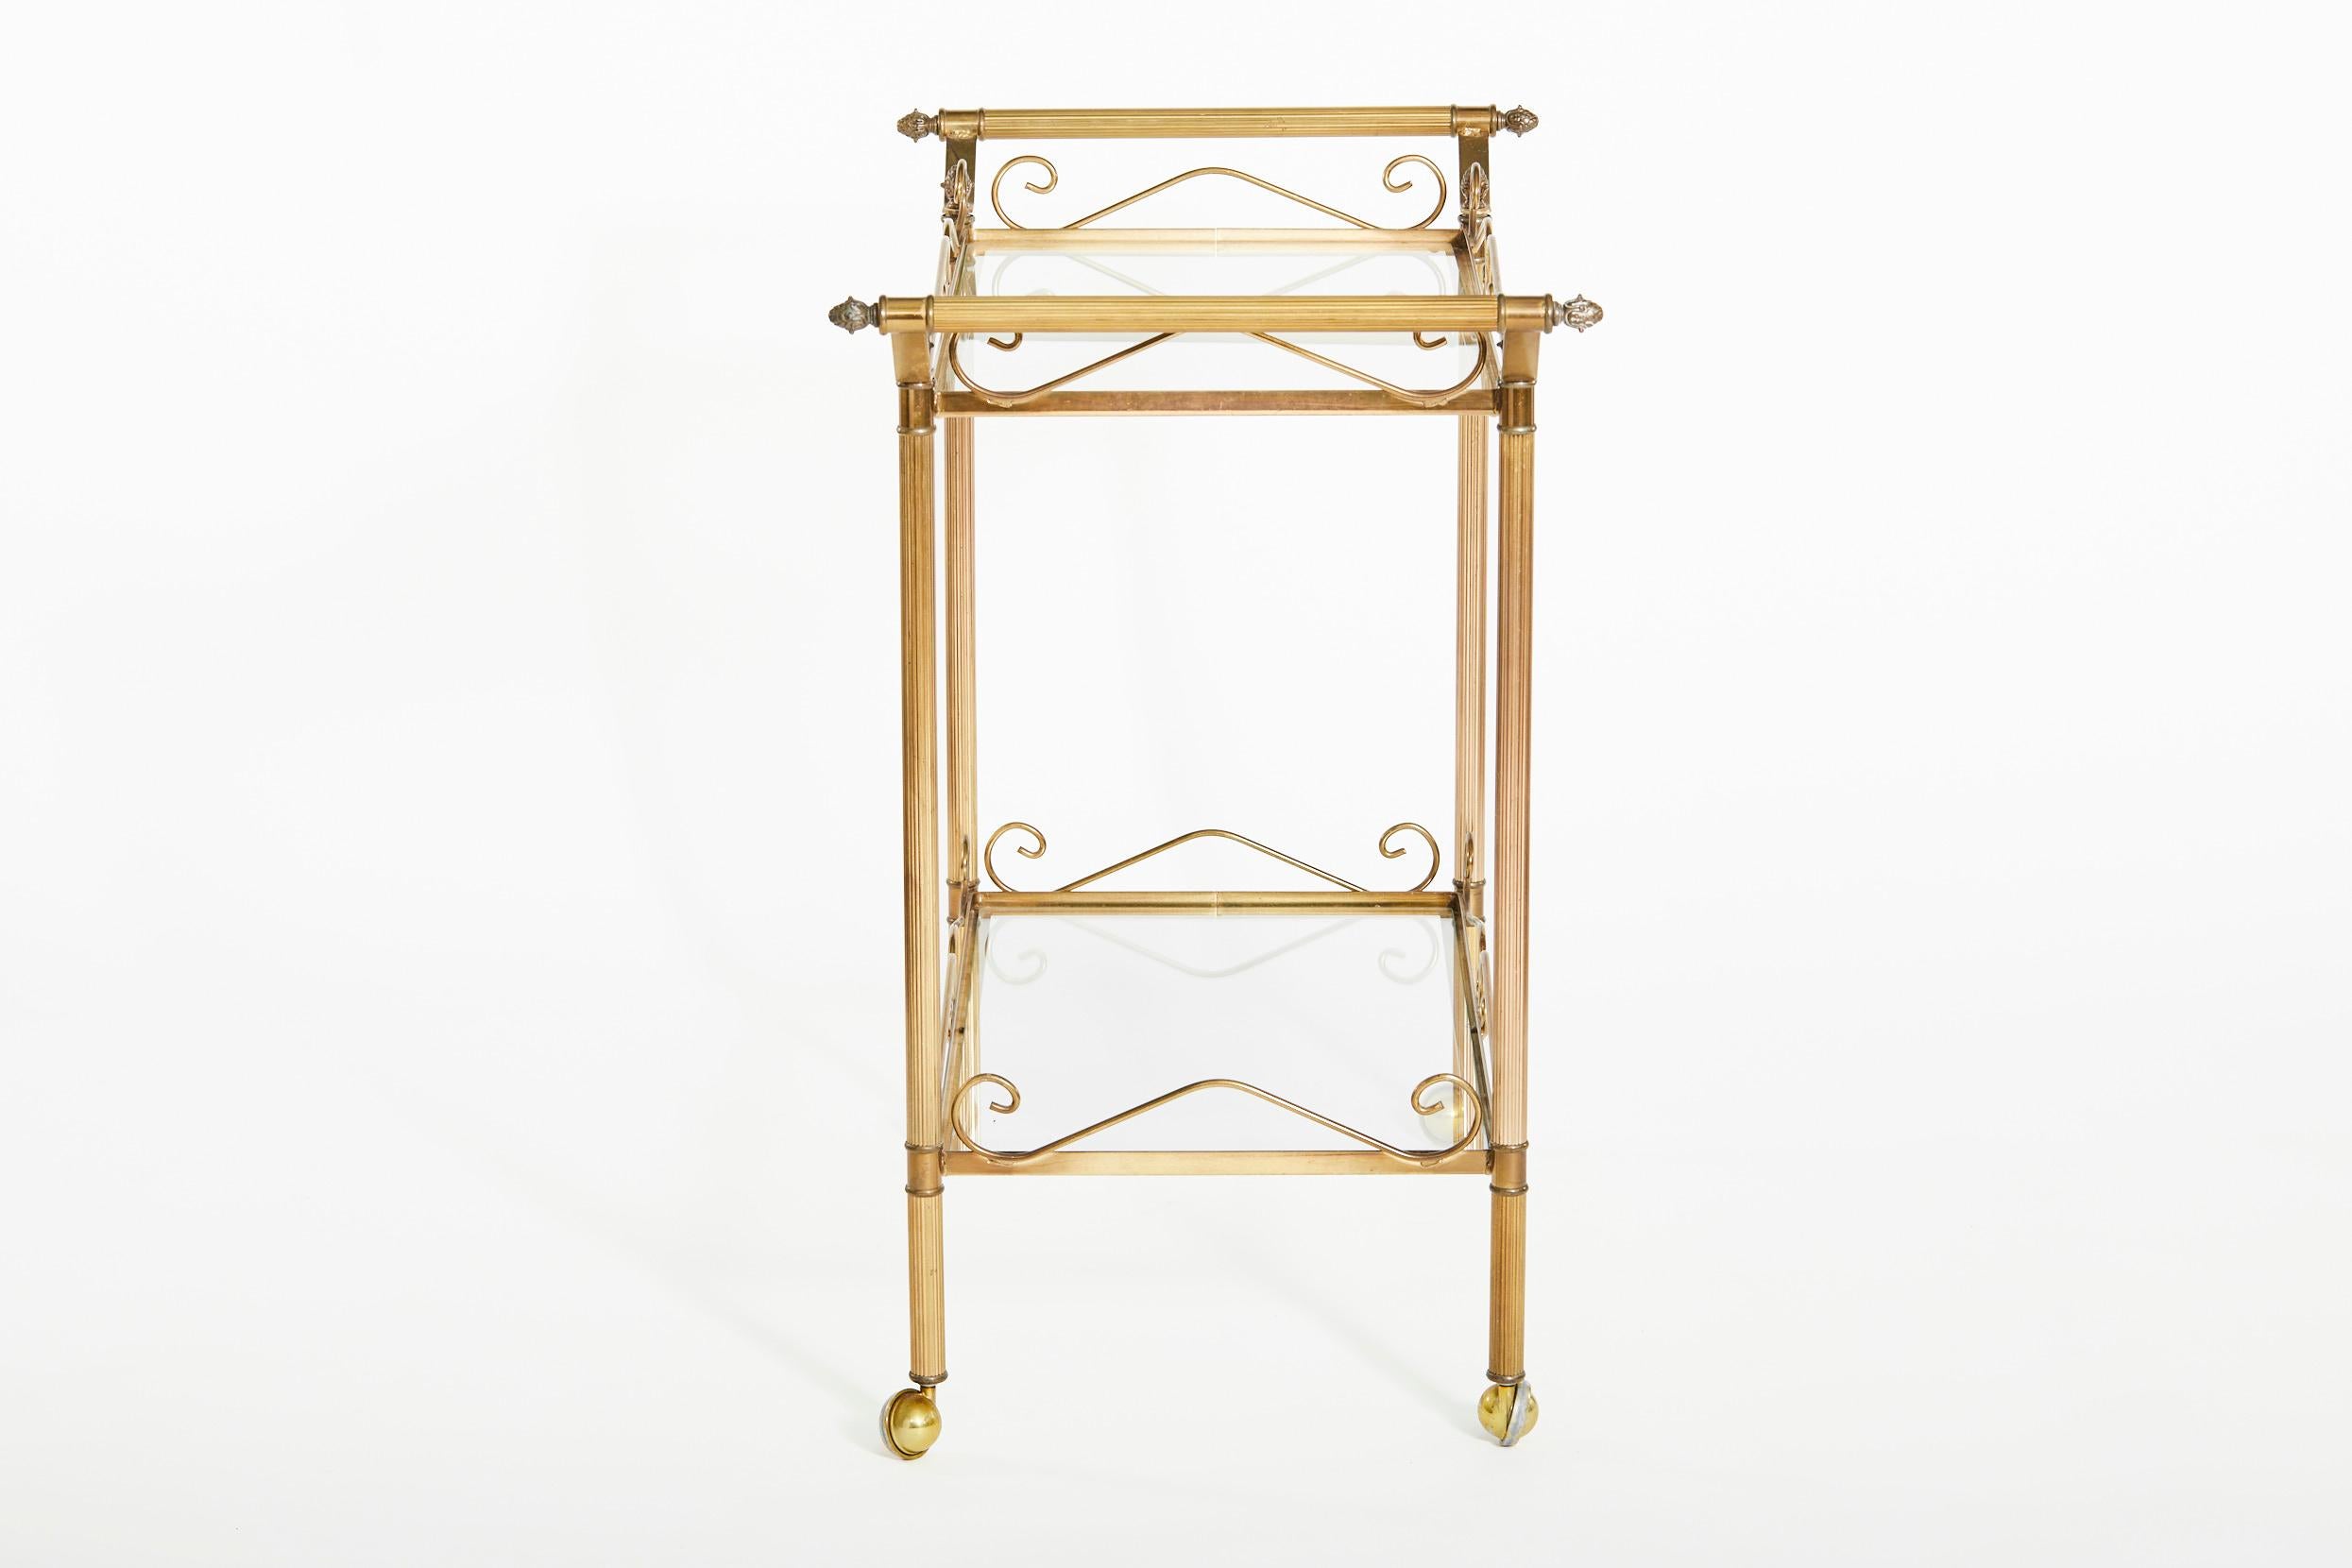 Beautiful mid 20th century brass frame with glass design details two tiered wheeled bar cart. The bar cart features top and lower glass shelve, two side handle with exterior design details. The cart is in great condition. Minor wear consistent with